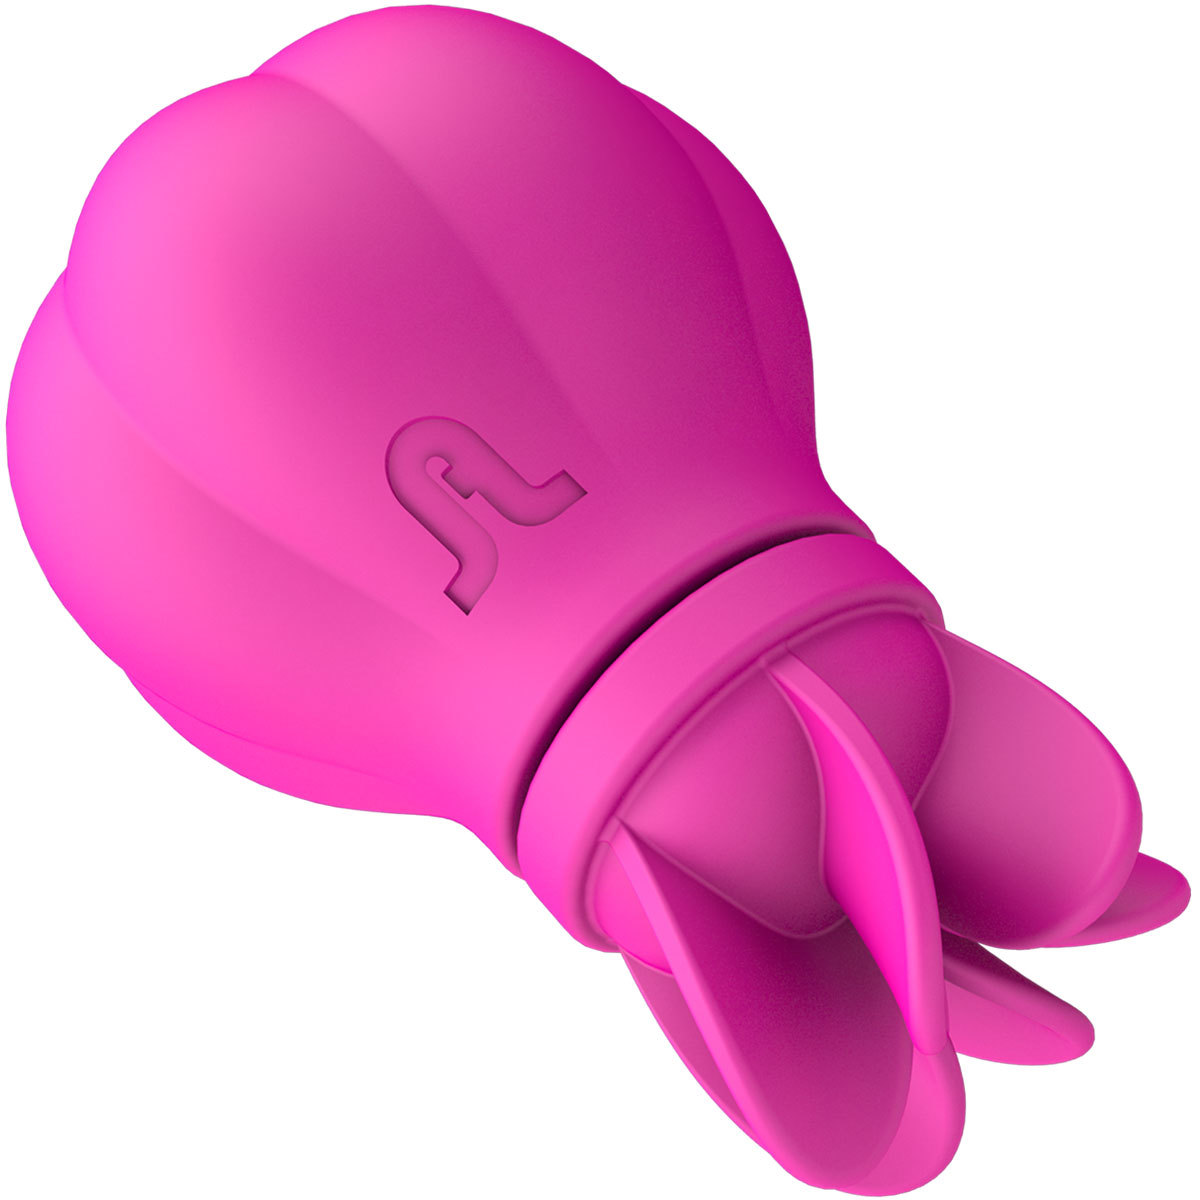 Adrien Lastic Caress 11-Function Rotating Silicone Rechargeable Clitoral Vibrator